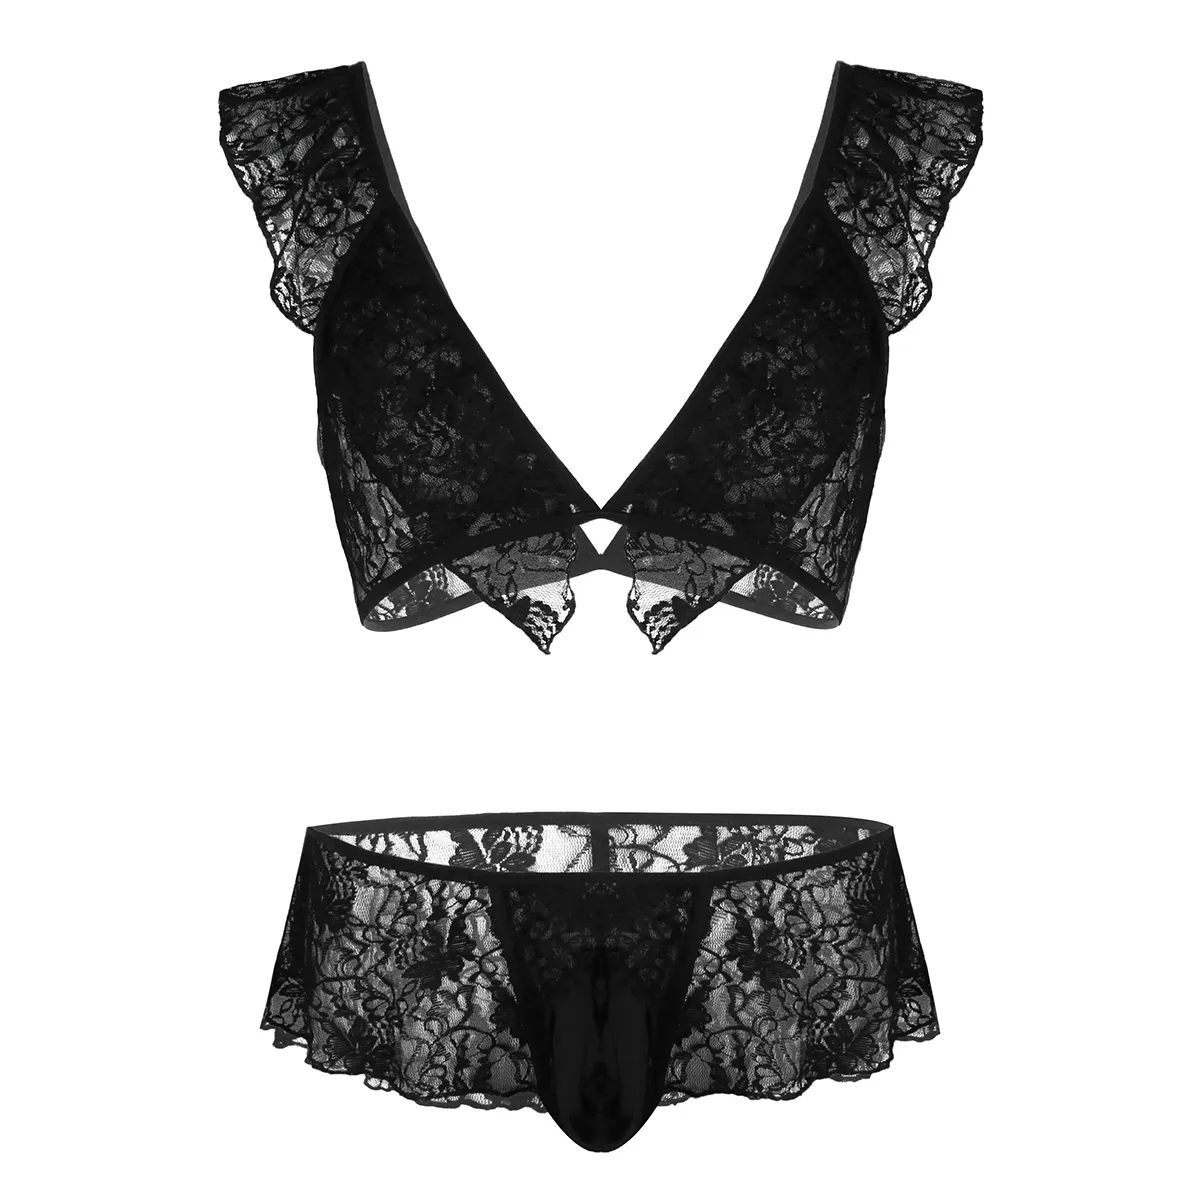 Sissy Men Lingerie Set Open Bra Top Skirted Thong Sex Shop Nightwear Gay  Sexy Lace Panties Underwear Hot Exotic Apparel From Mallthree, $18.83